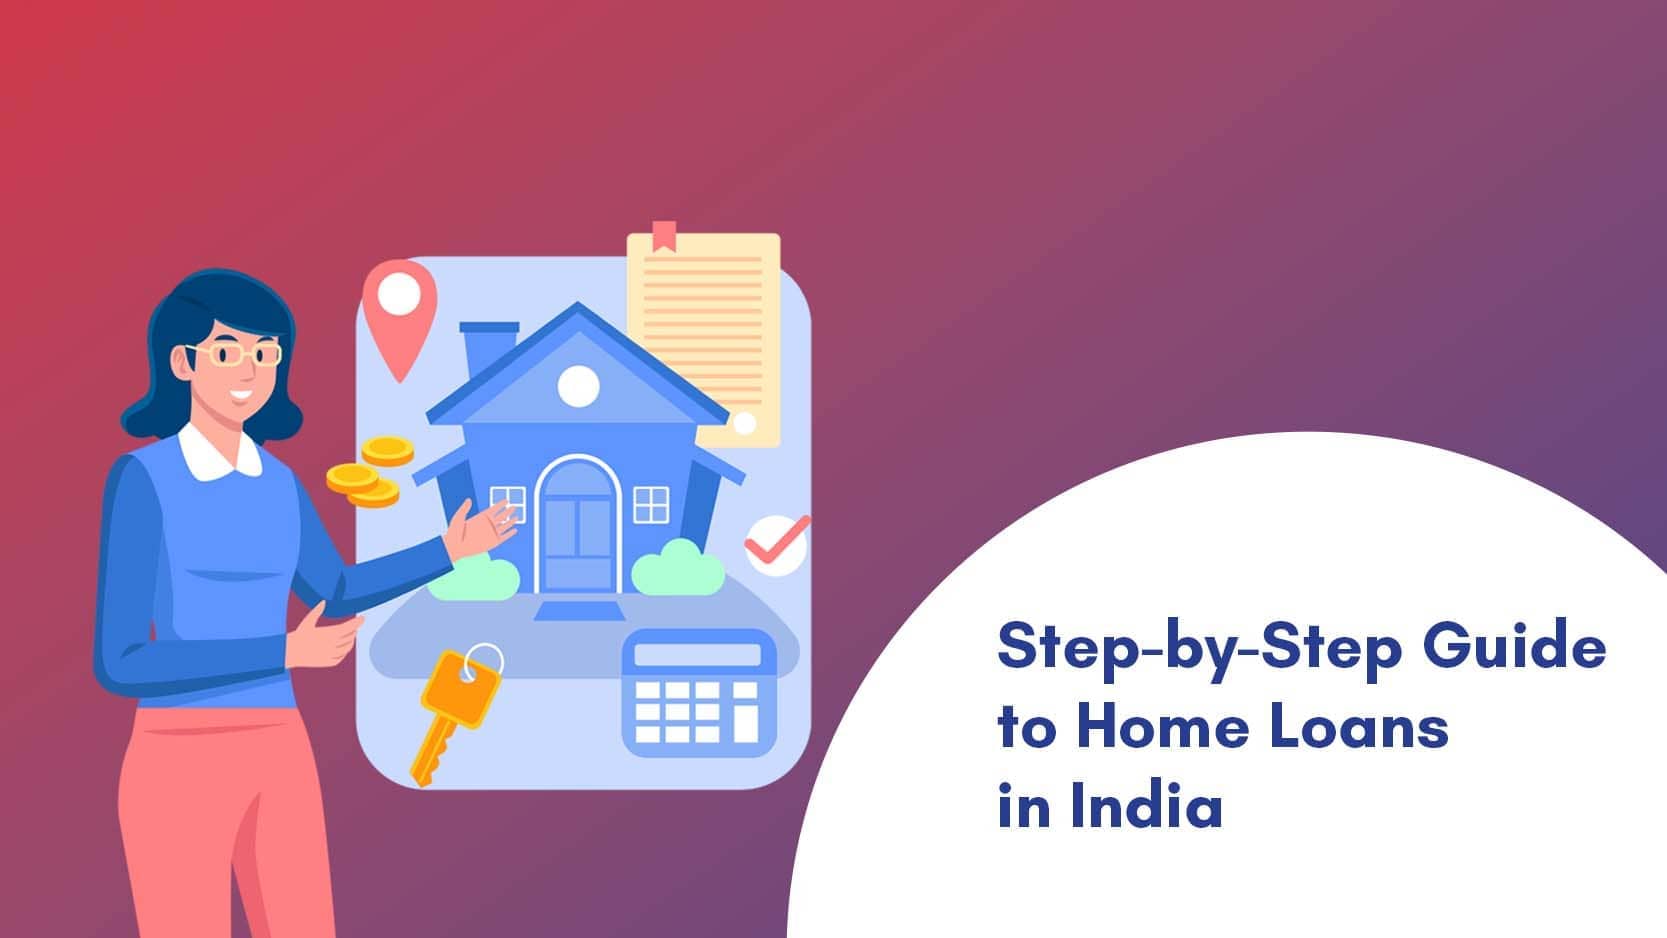 Step-by-Step Guide to Home Loans in India